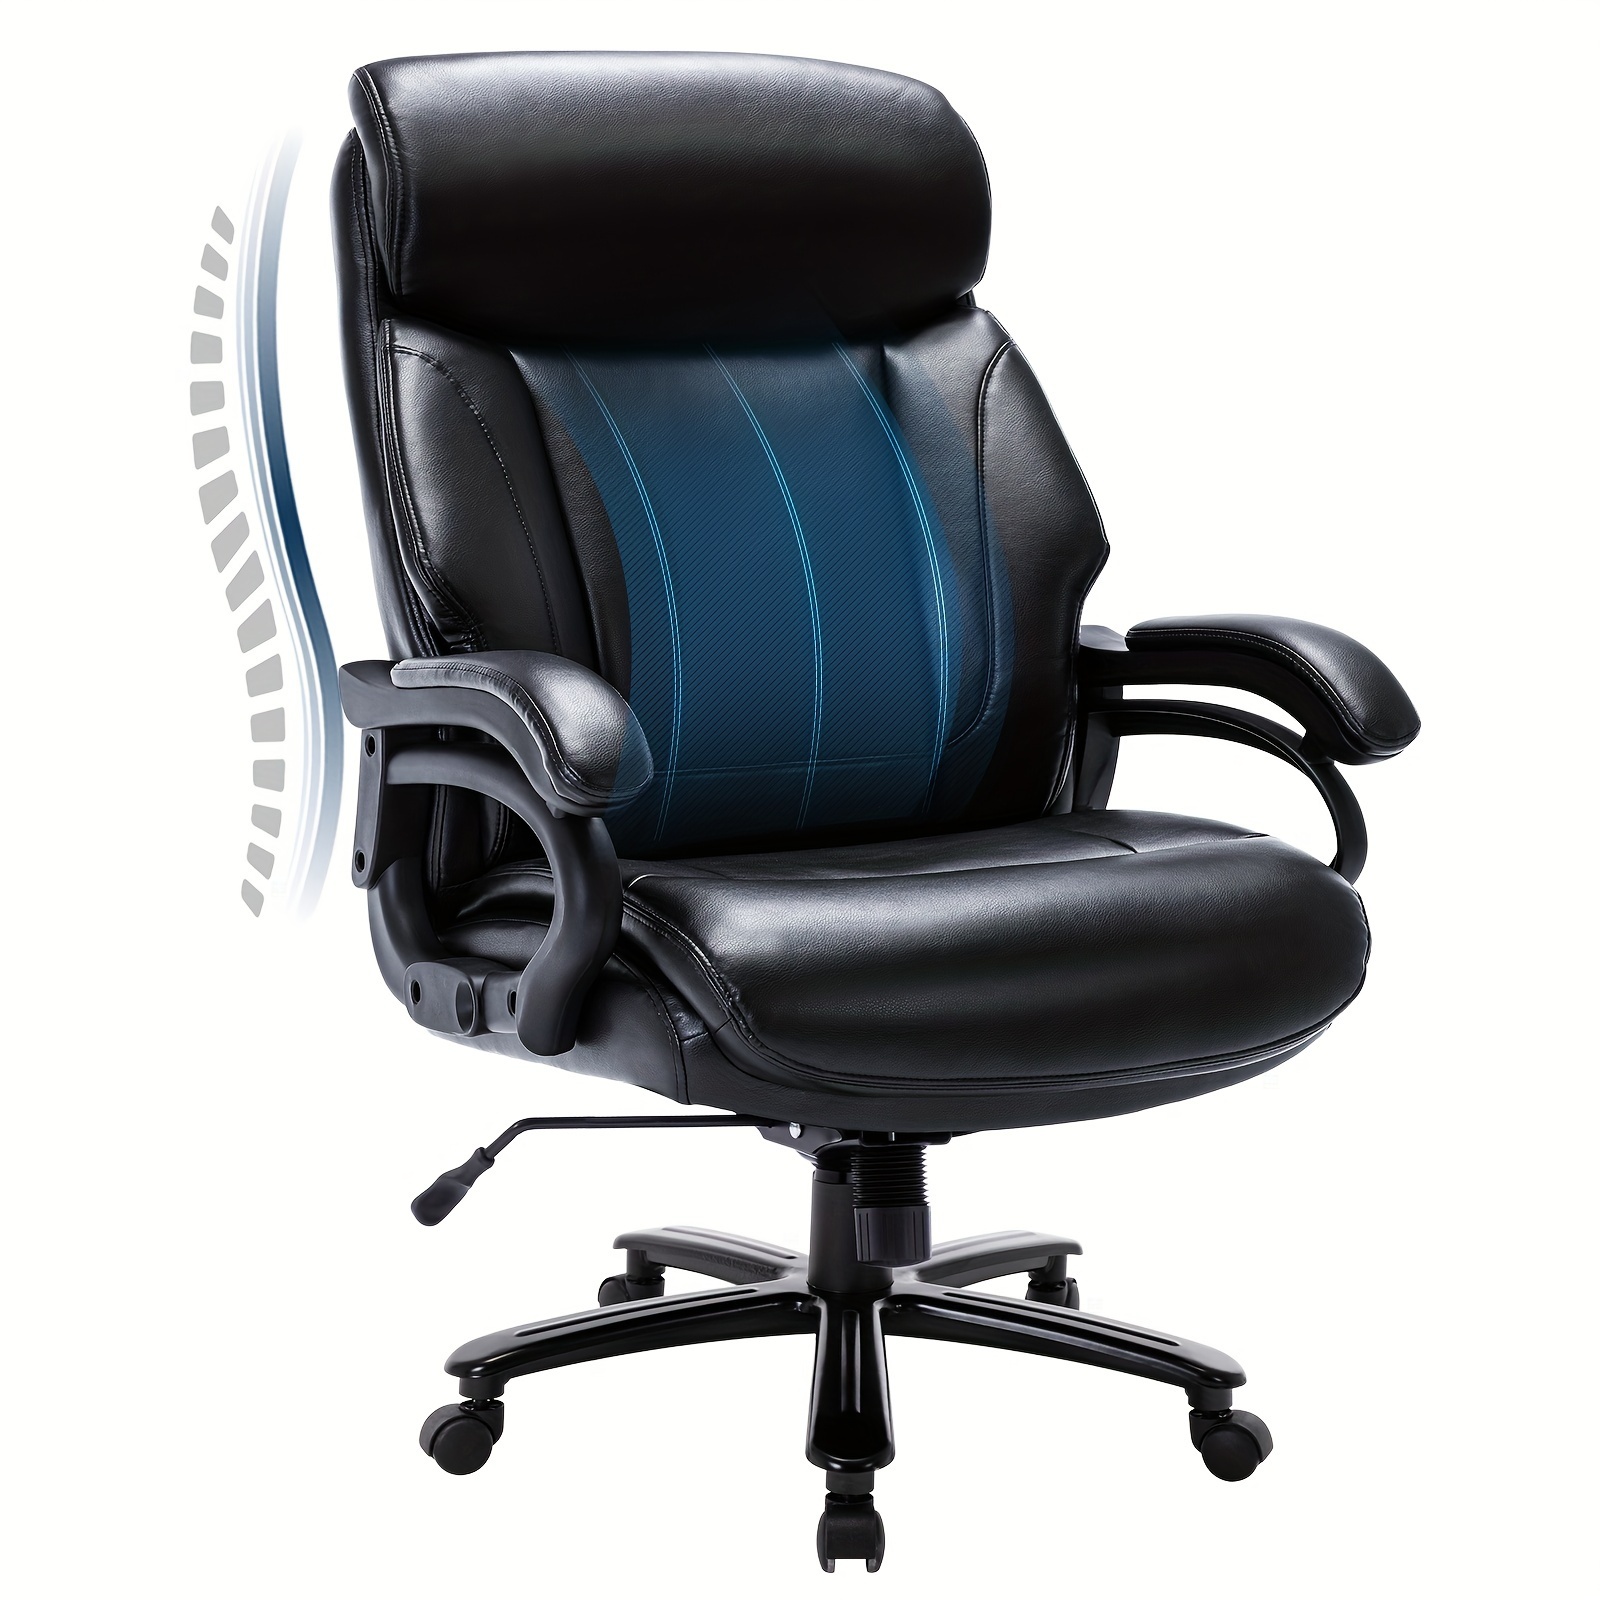 

1pc Office Chair 400lbs-heavy Duty Executive Desk Chair With Extra Wide Seat, High Back Leather Computer Chair With Tilt Rock, Padded Armrests